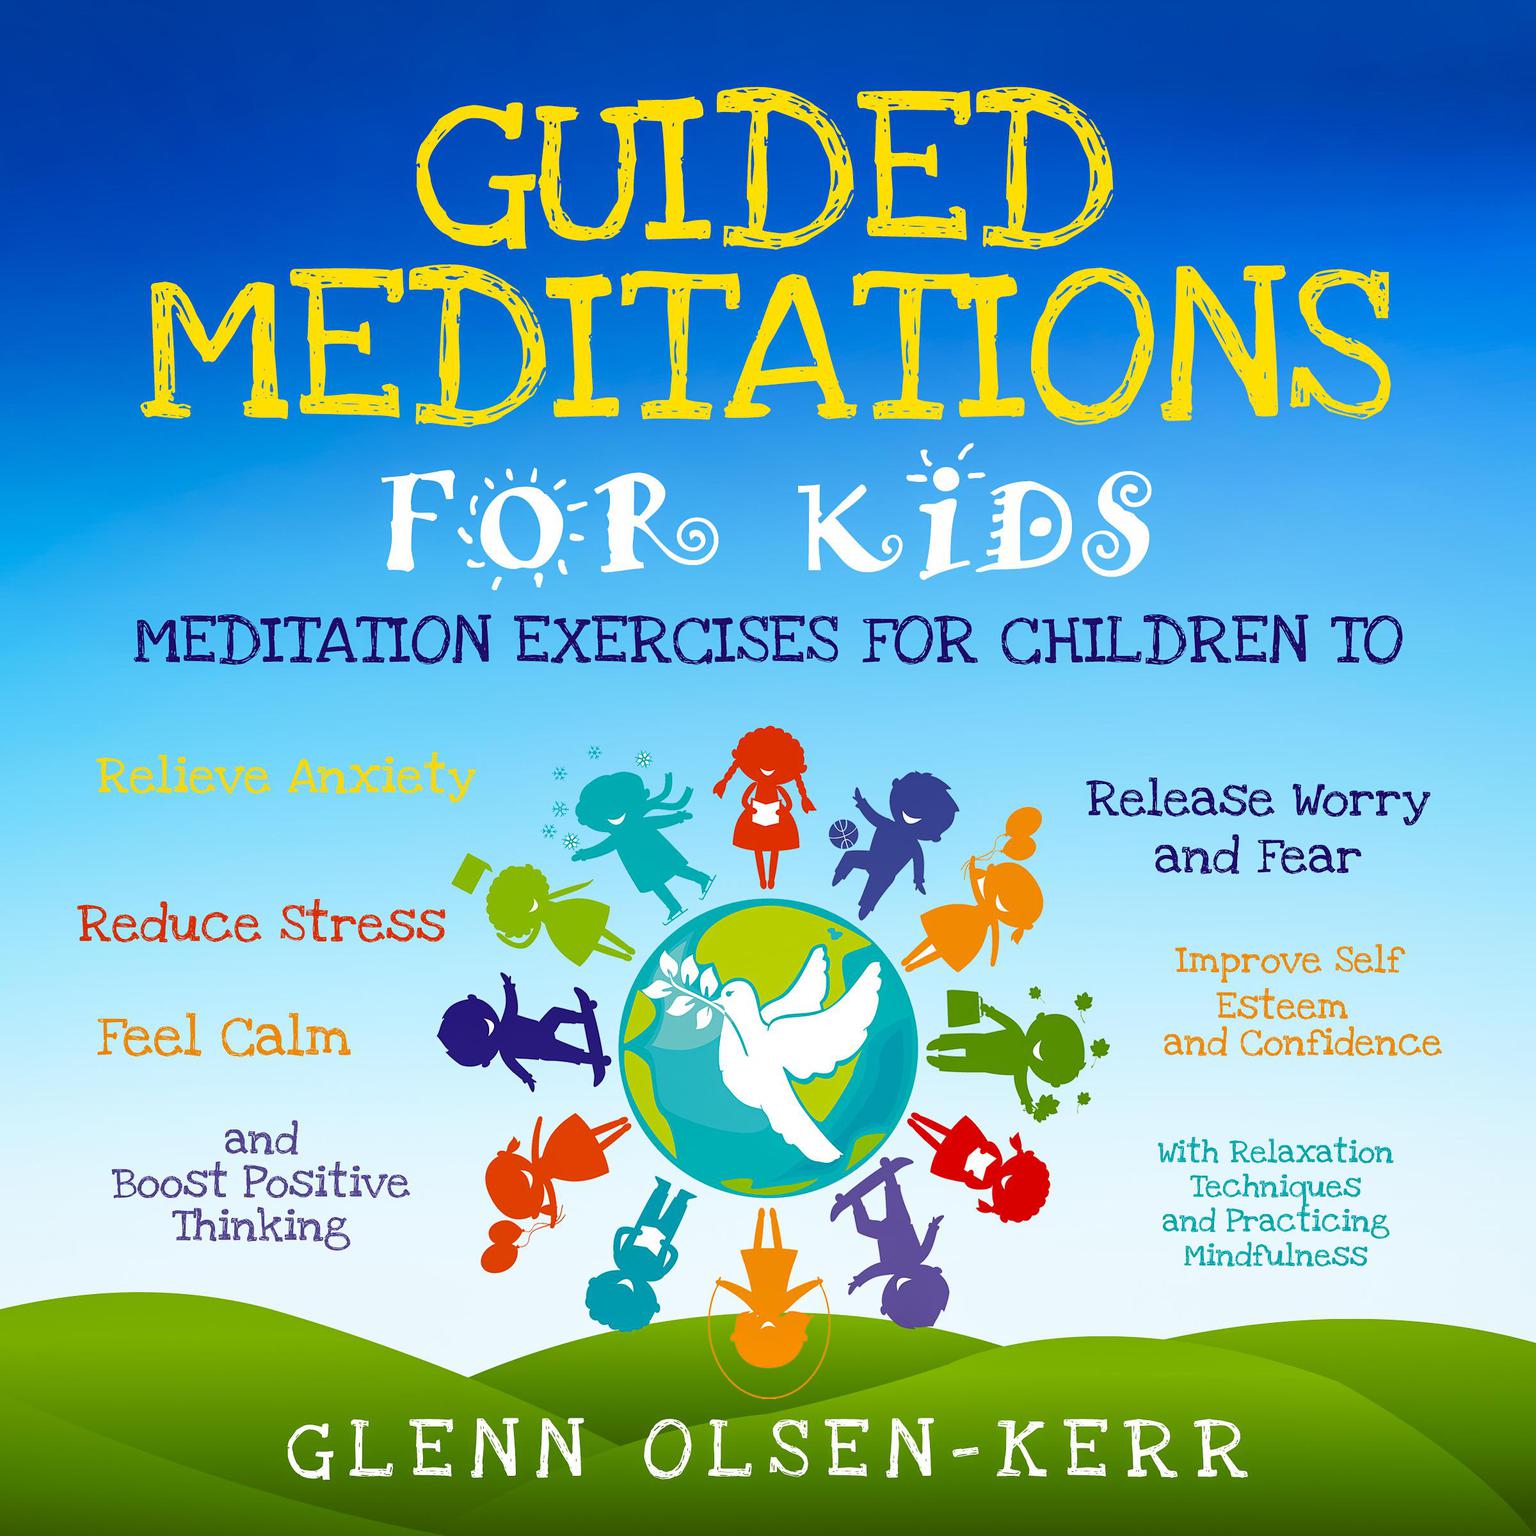 Guided Meditations for Kids: Meditation Exercises for Children to Relieve Anxiety, Release Worry and Fear, Reduce Stress, Improve Self Esteem and Confidence, Feel Calm, and Boost Positive Thinking With Relaxation Techniques and Practicing Mindfulness Audiobook, by Glenn Olsen-Kerr